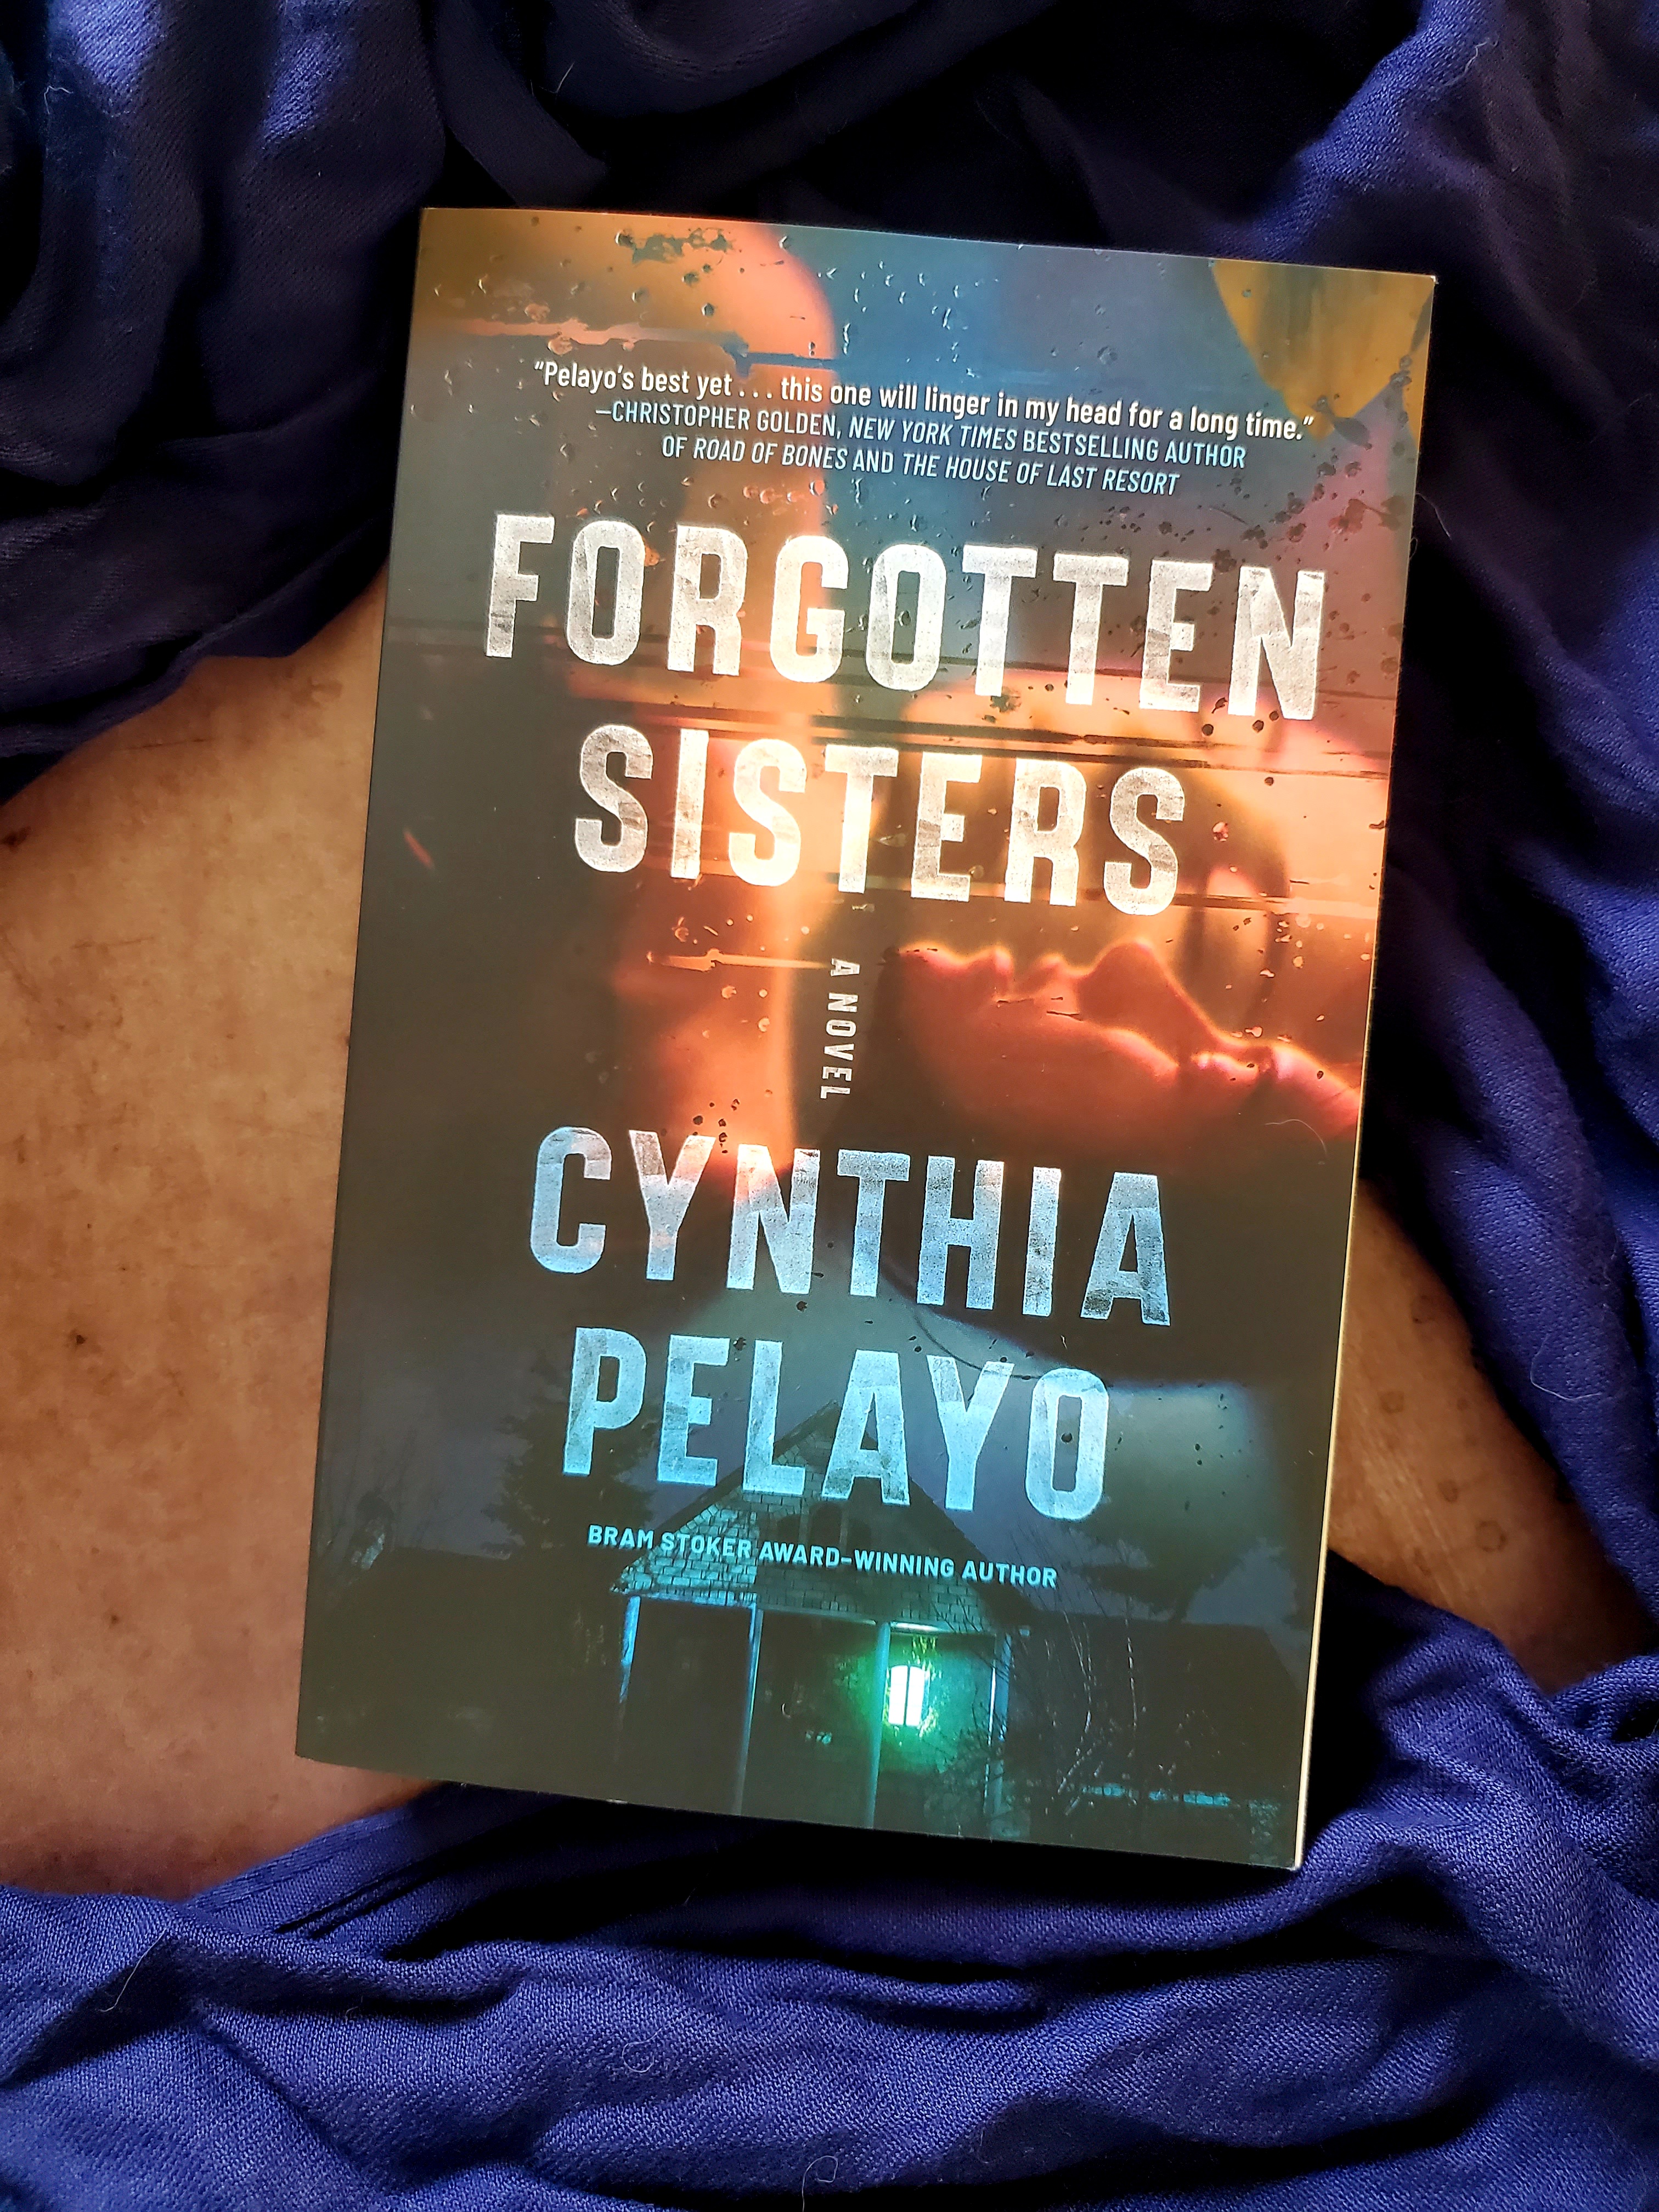 Book cover of Forgotten Sisters by Cynthia Pelayo